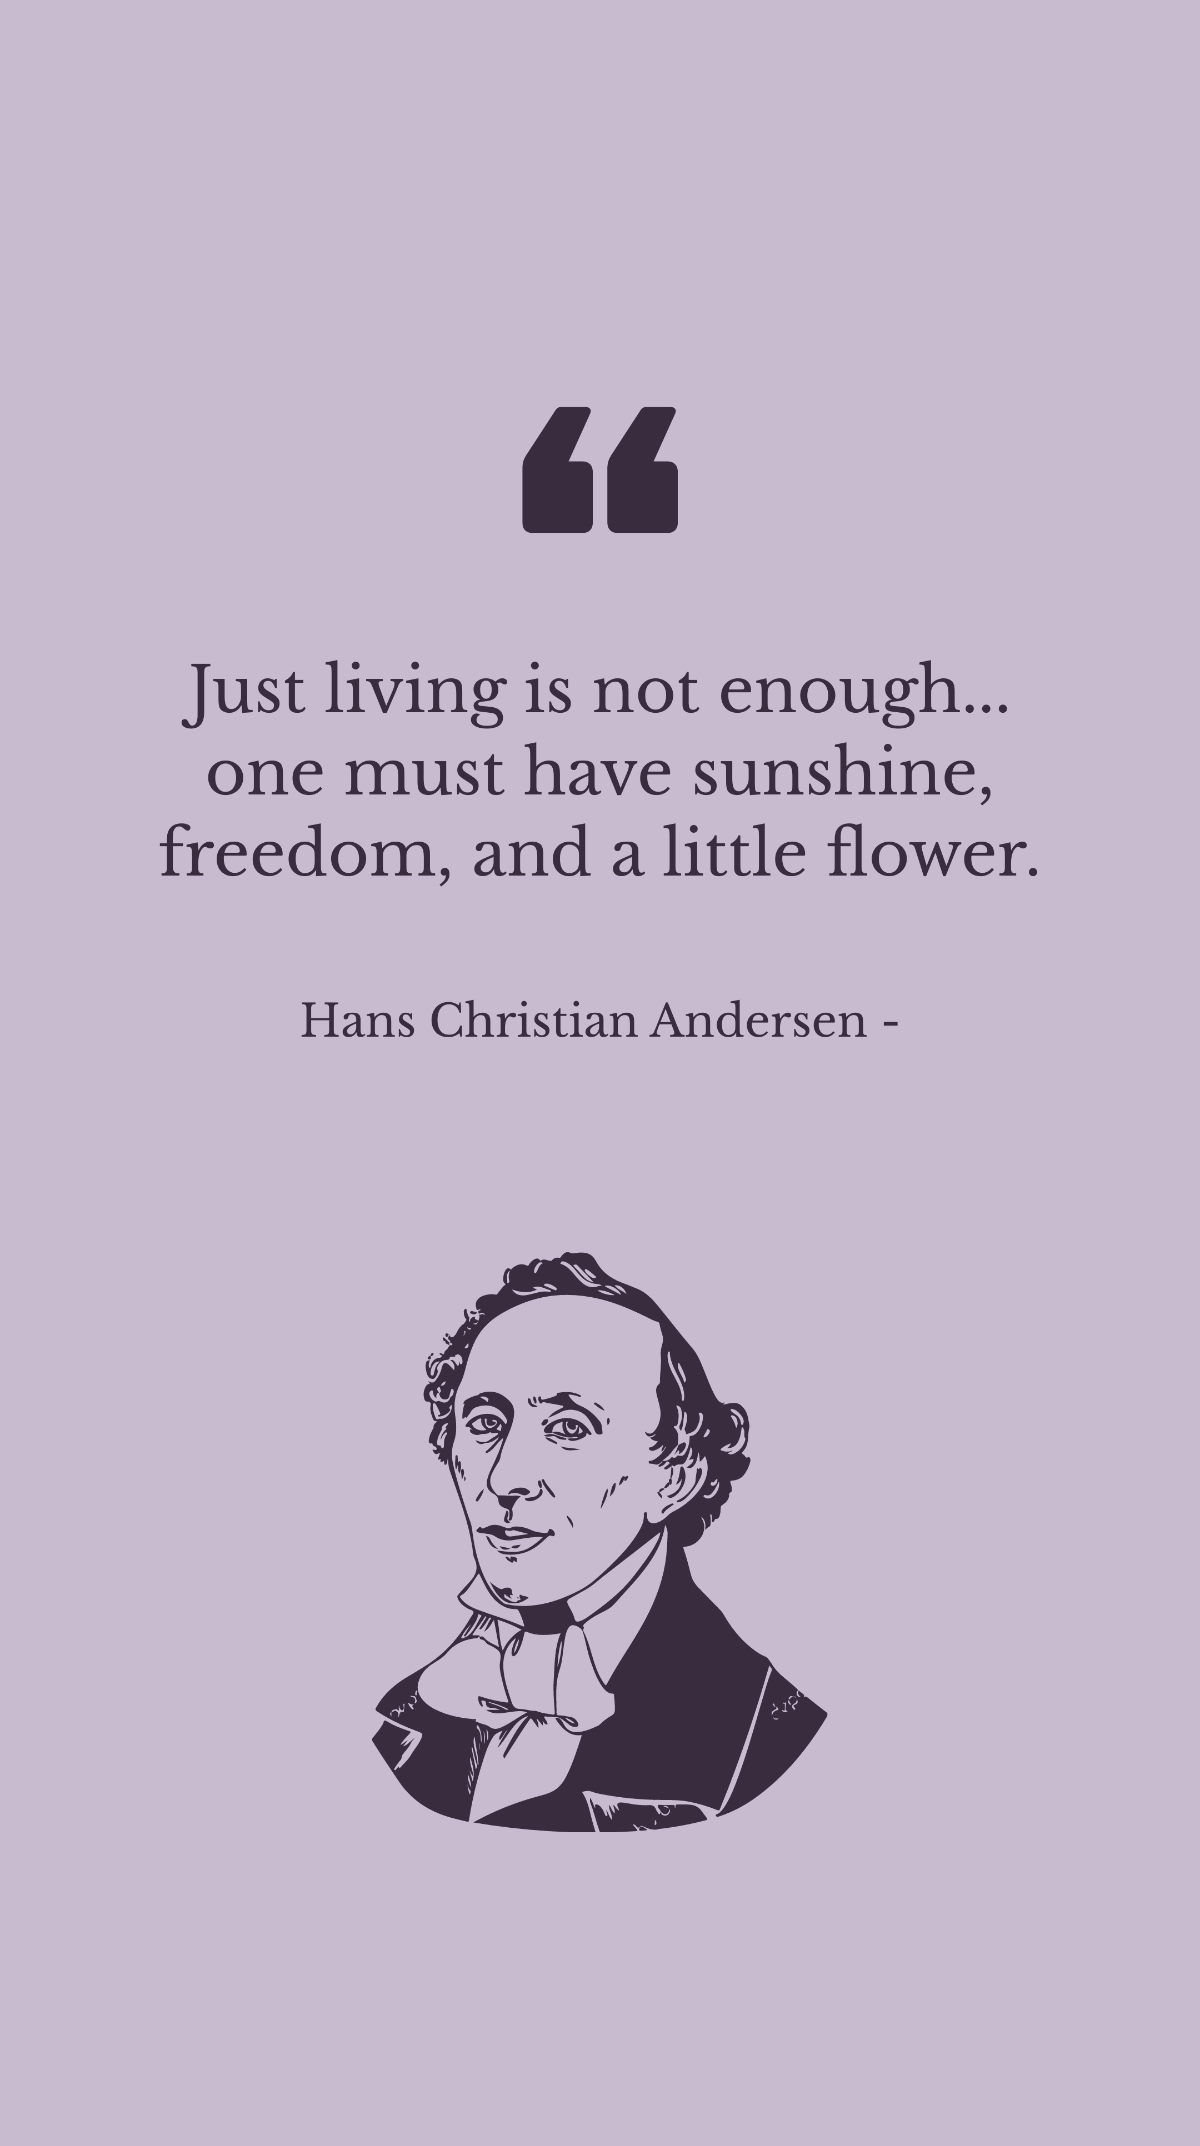 Hans Christian Andersen - Just living is not enough... one must have sunshine, freedom, and a little flower. Template